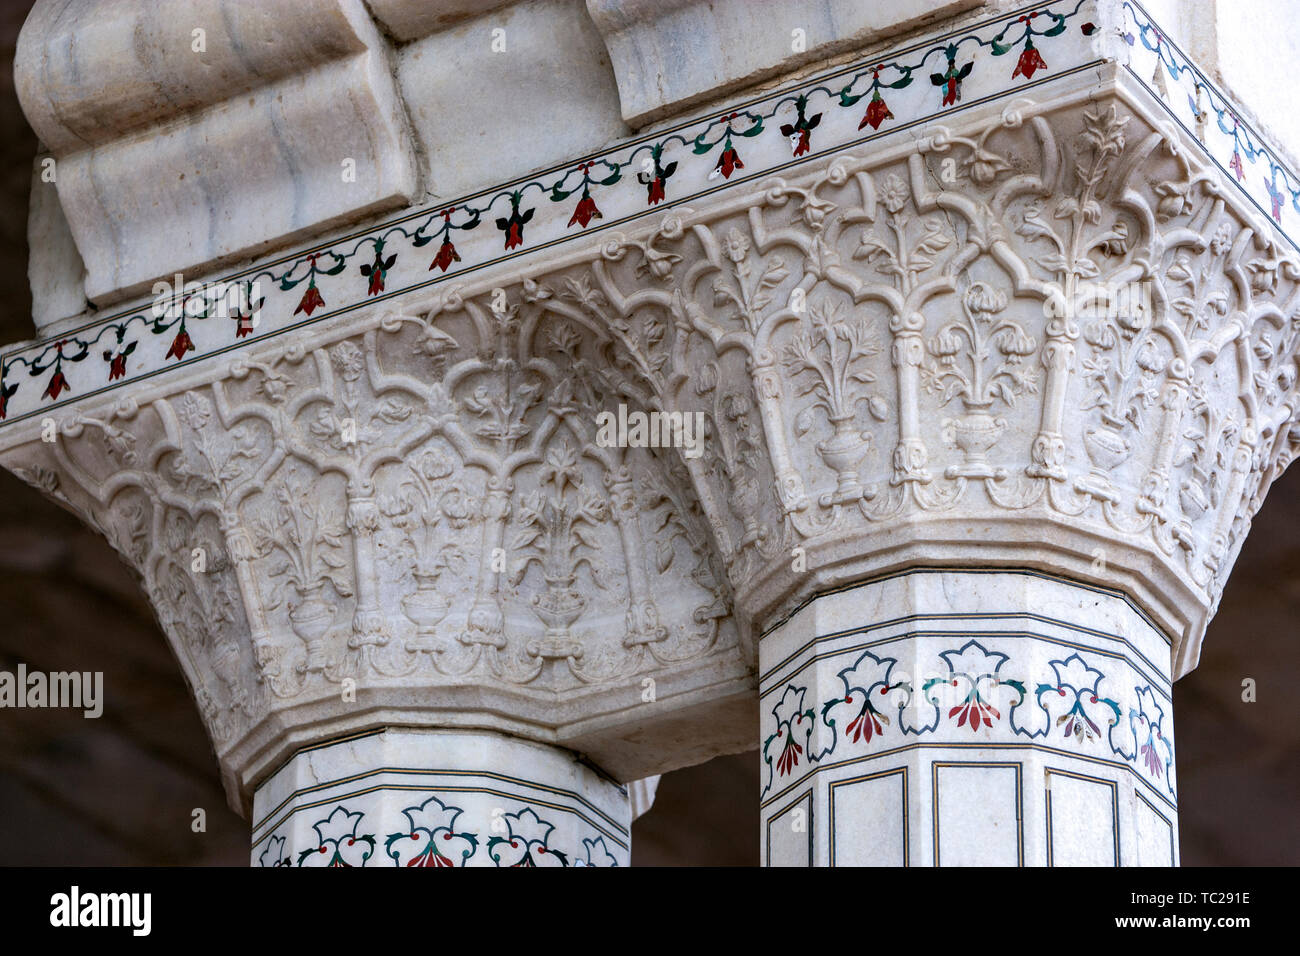 Marble column with carved capital in Agra Fort, Agra, Uttar Pradesh, North India Stock Photo